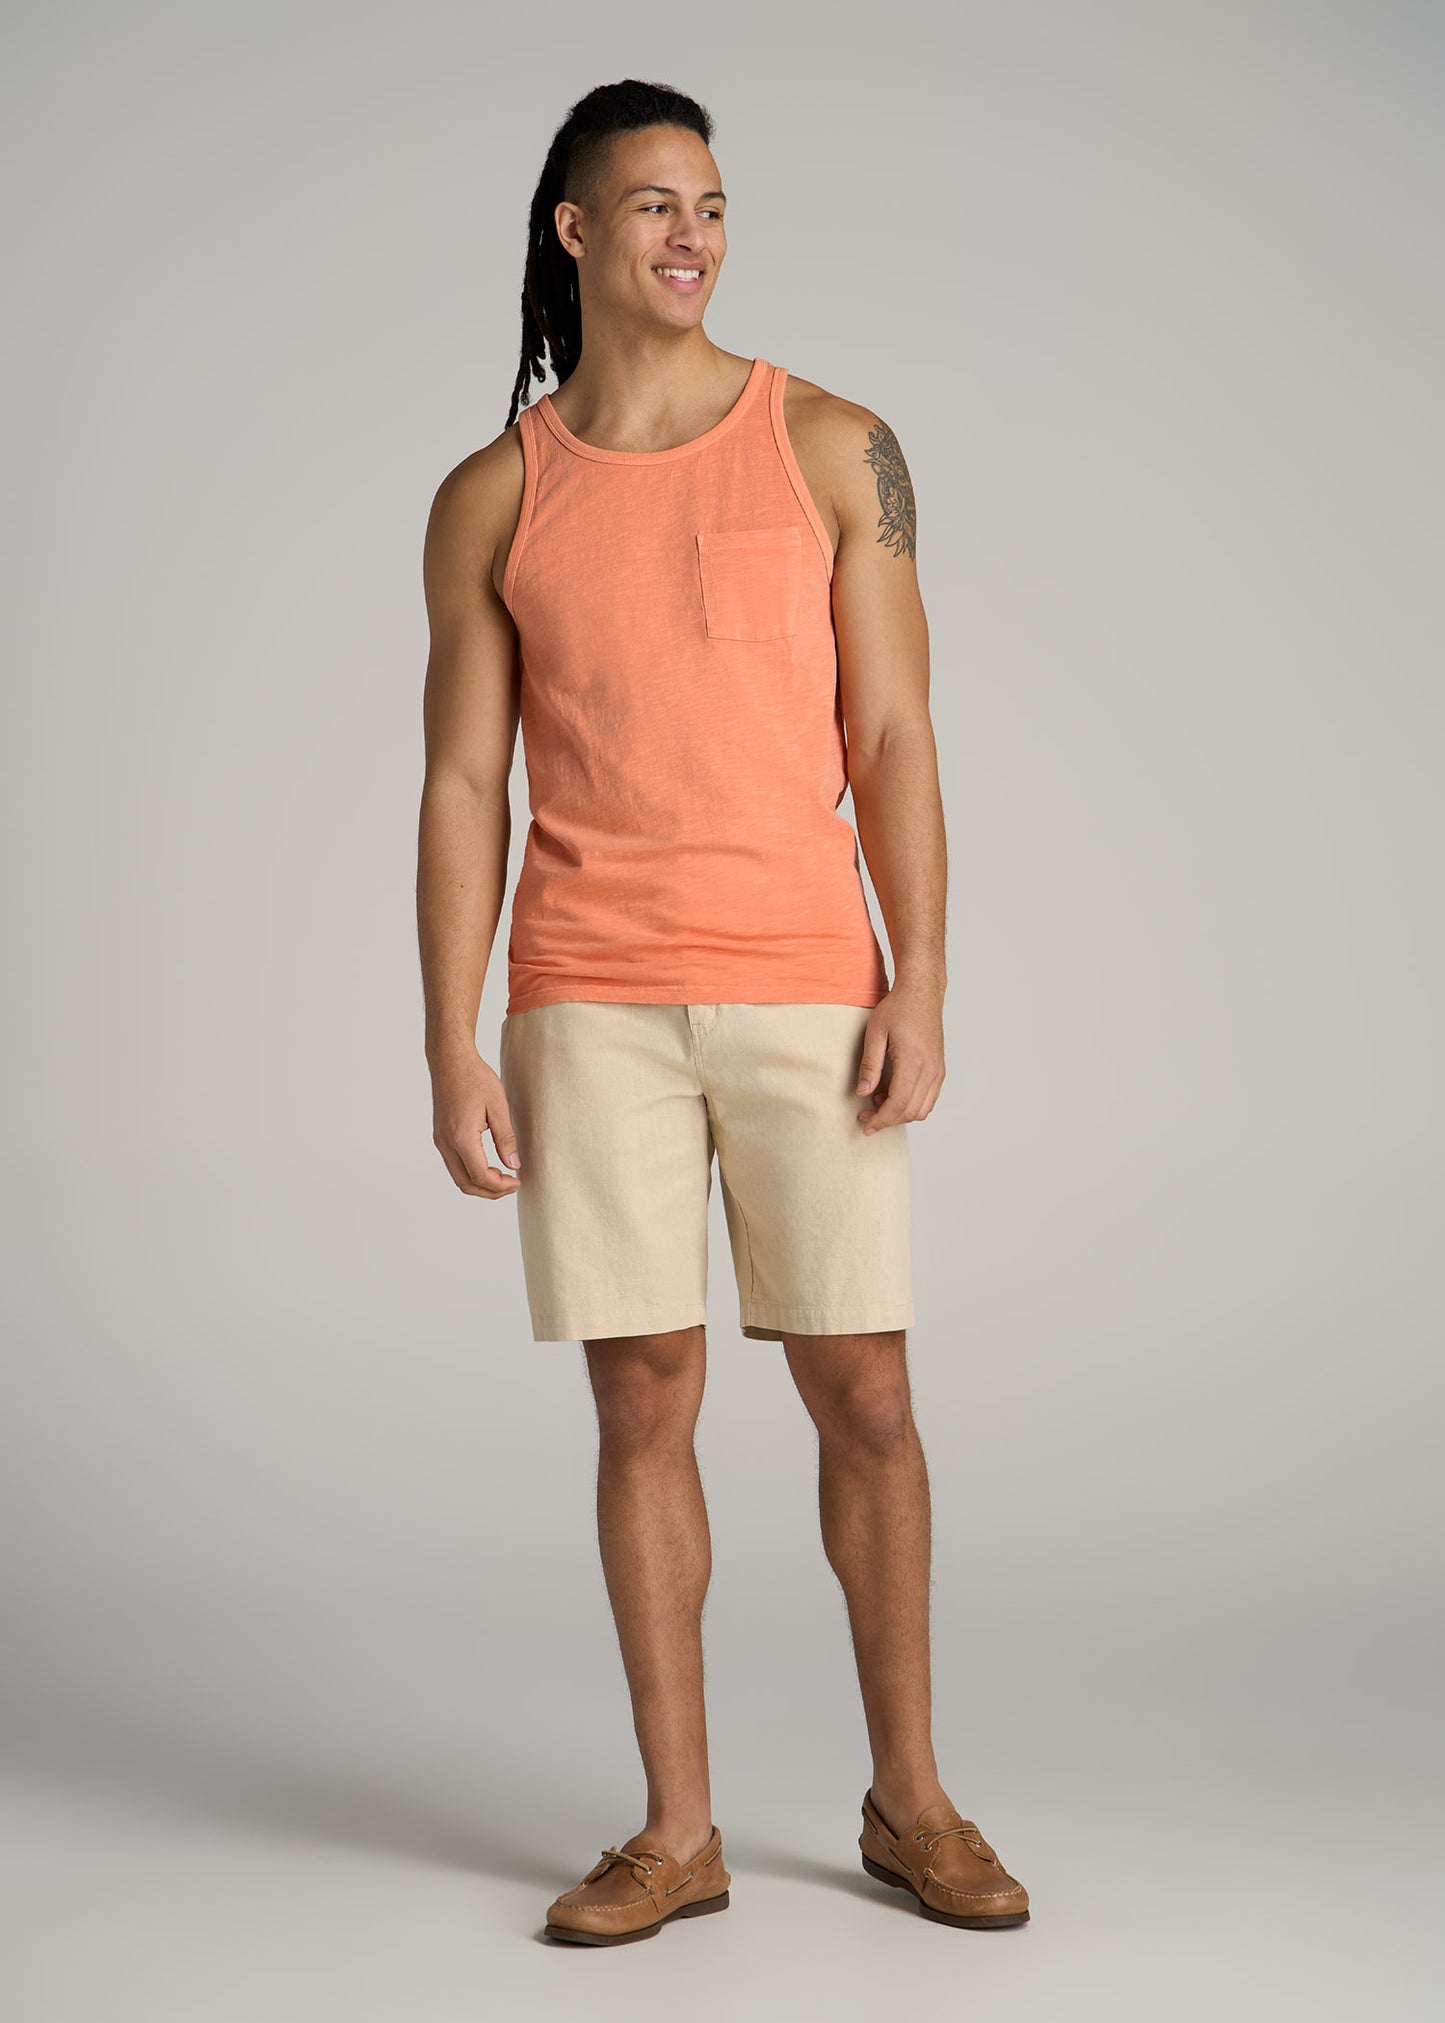 A tall man wearing American Tall's Slub Pocket Tank Top in Apricot Crush and Linen Shorts in Sandstone.